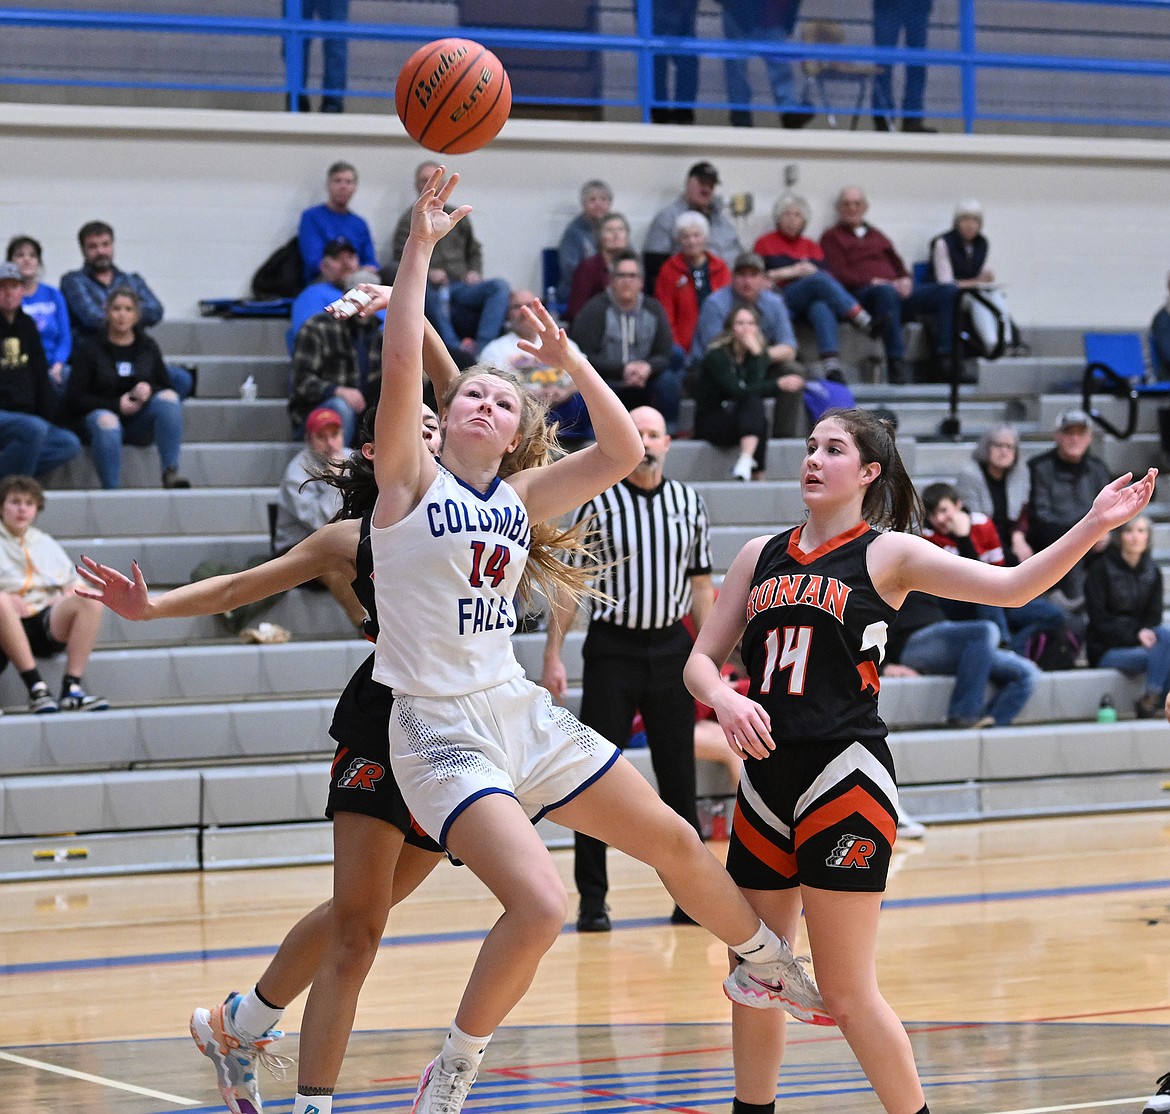 Junior Hope McAtee shoots a layup against Ronan on Friday. (Chris Peterson photo)